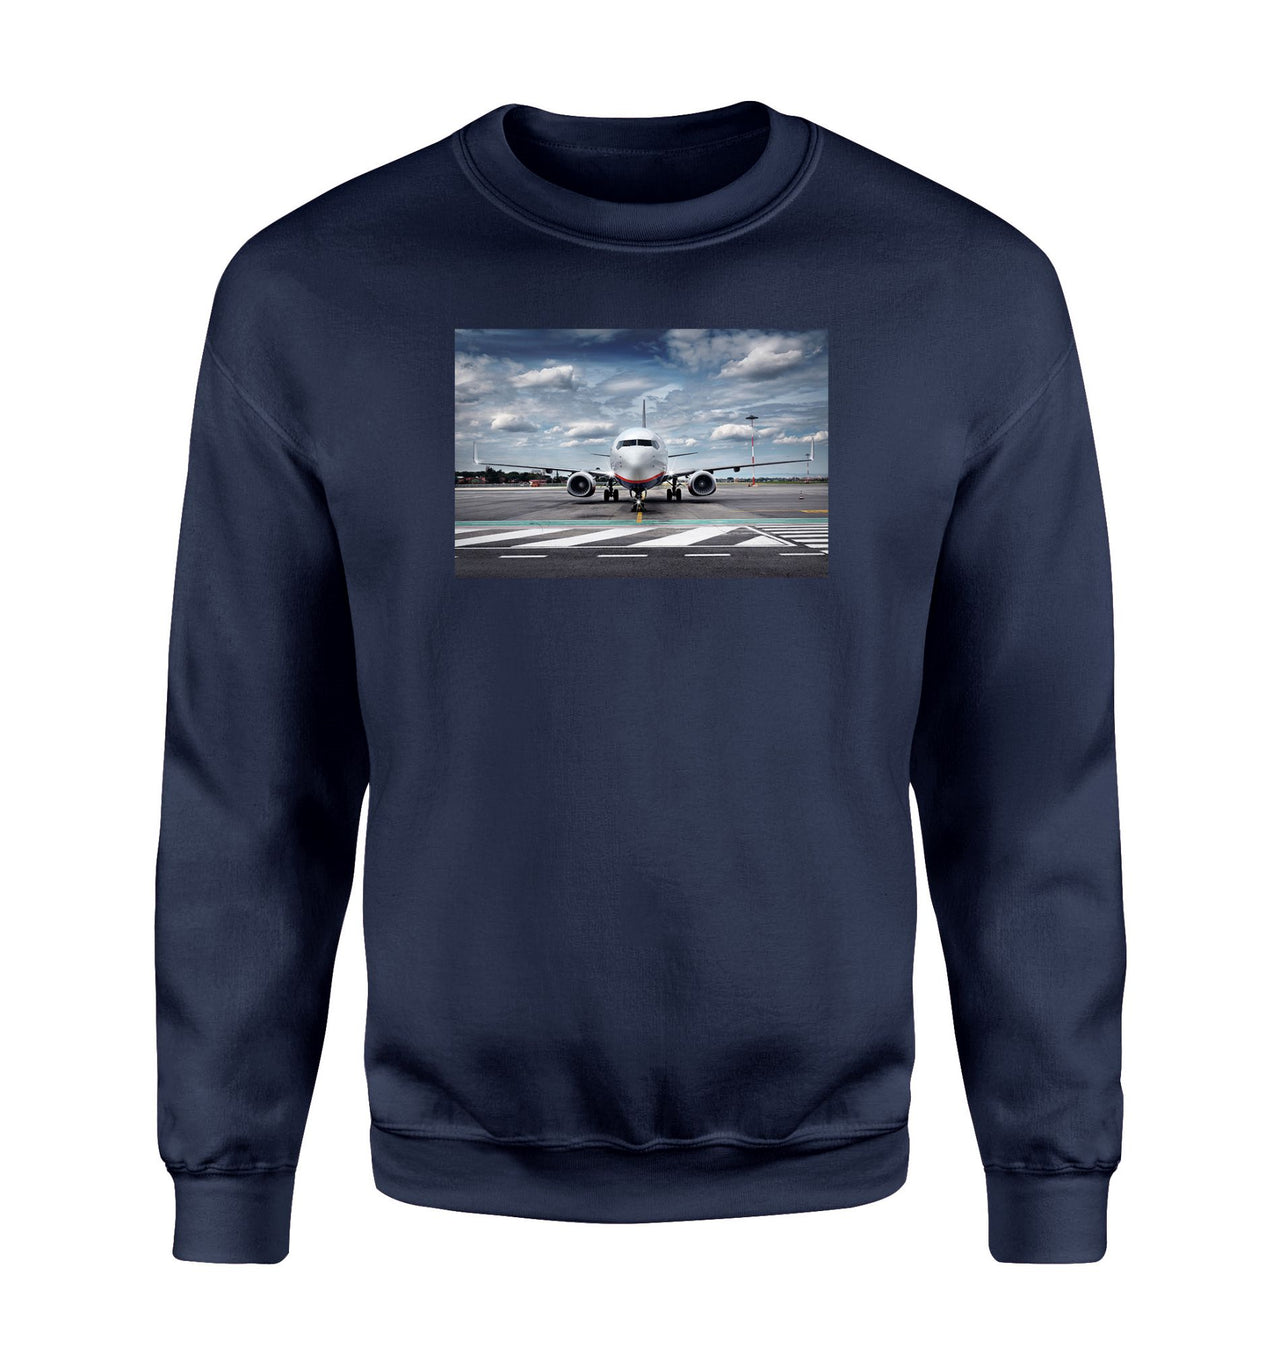 Amazing Clouds and Boeing 737 NG Designed Sweatshirts